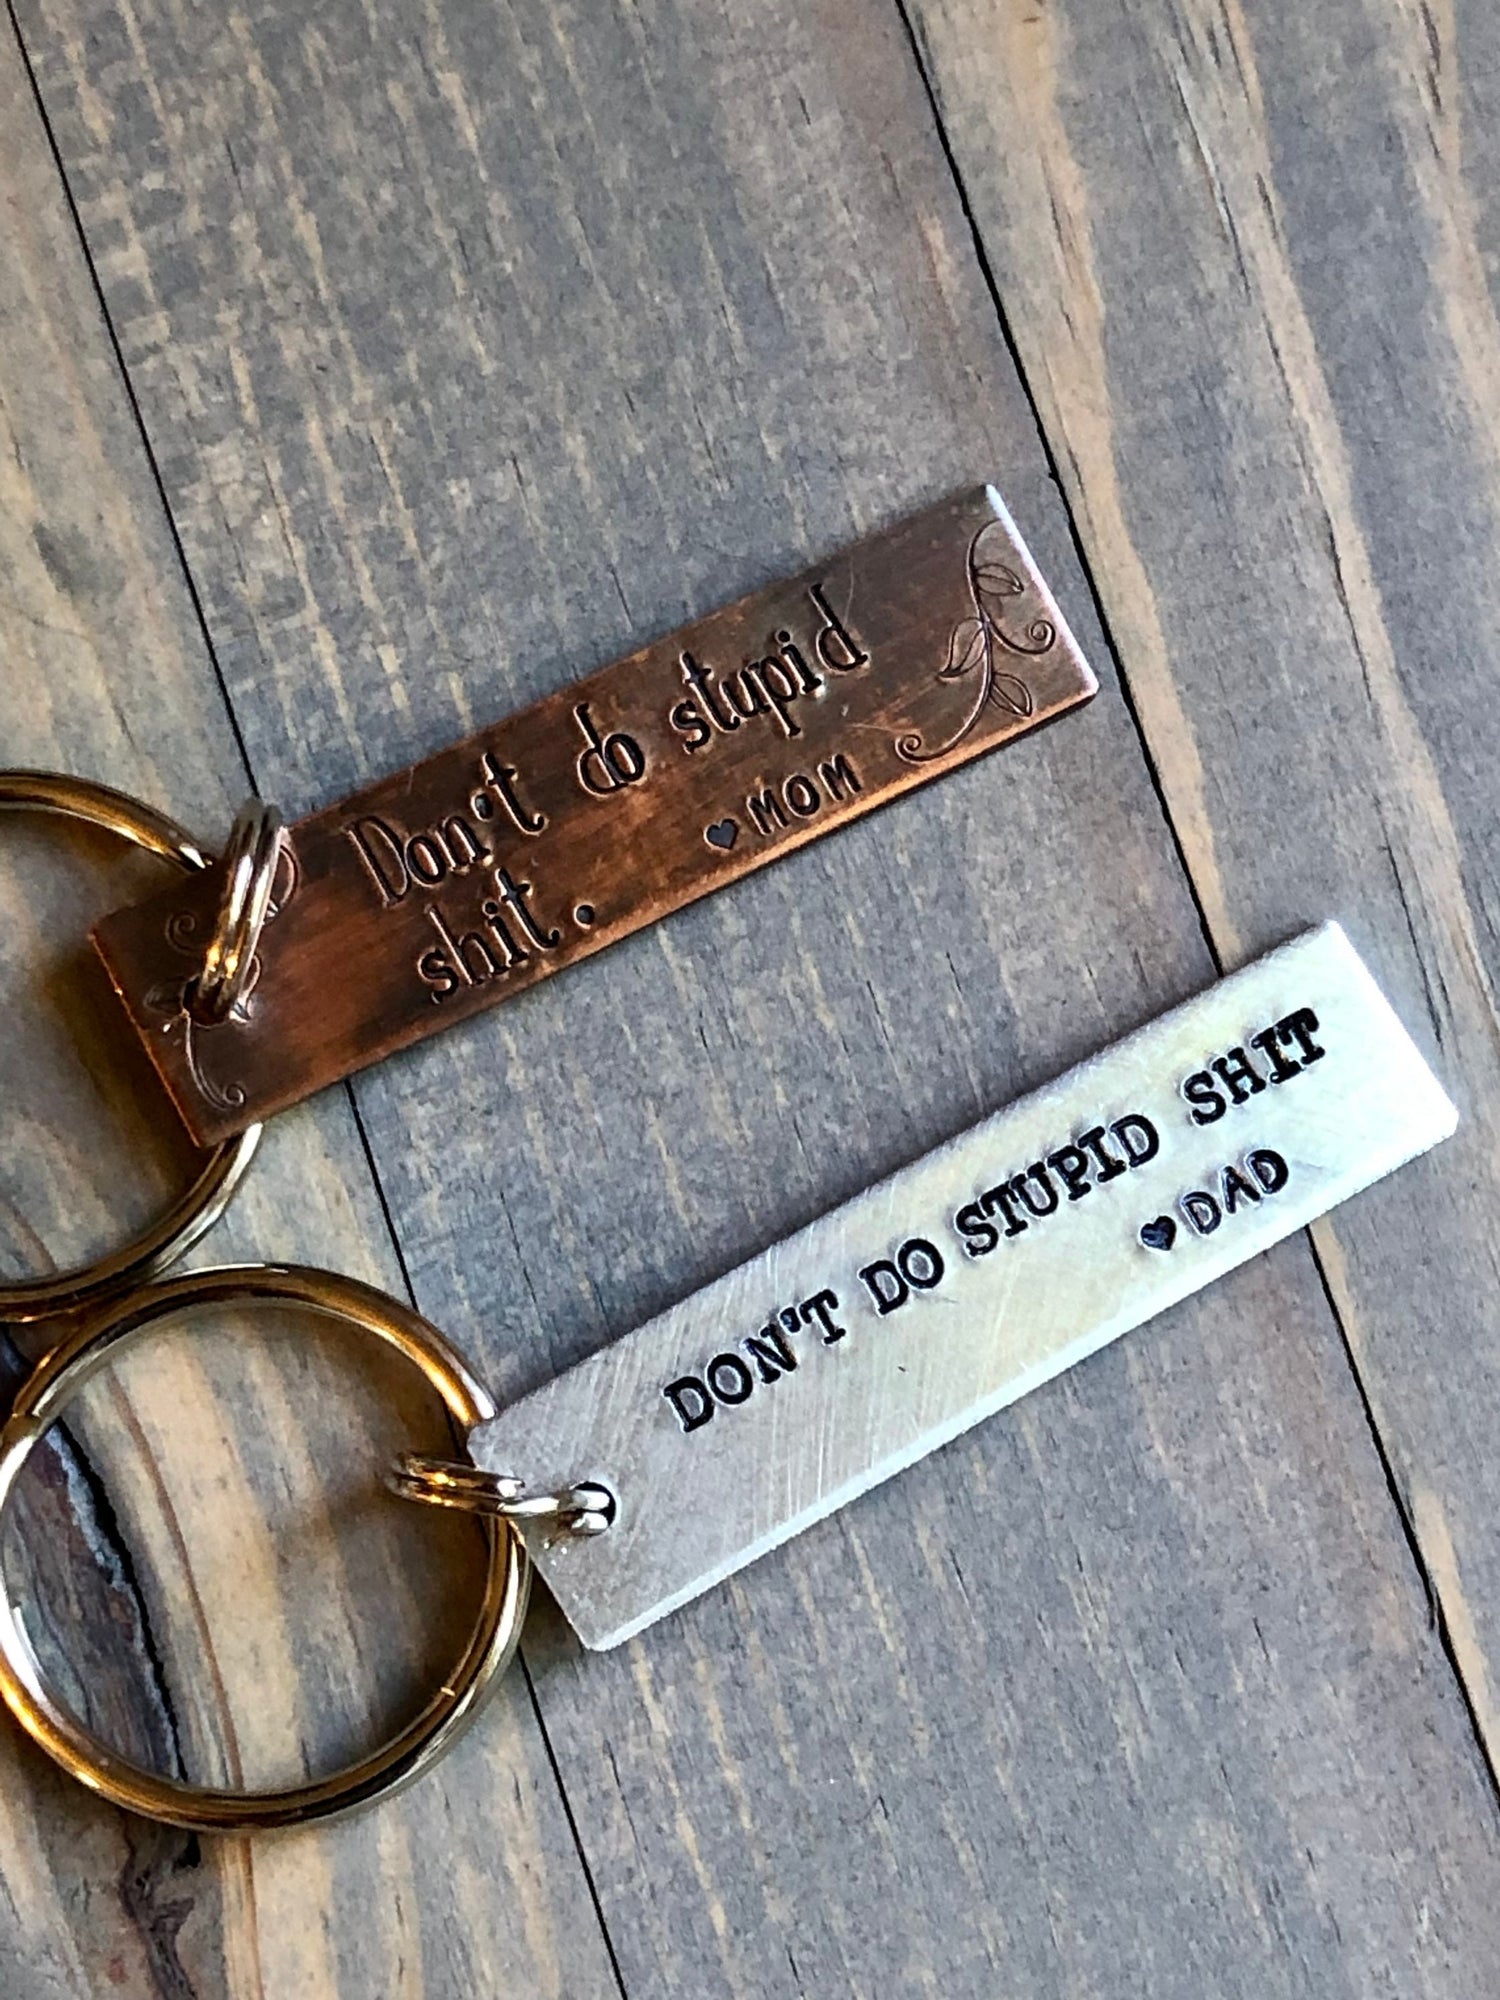 Have Fun BE SAFE DON'T DO STUPID Reminder KEYCHAIN